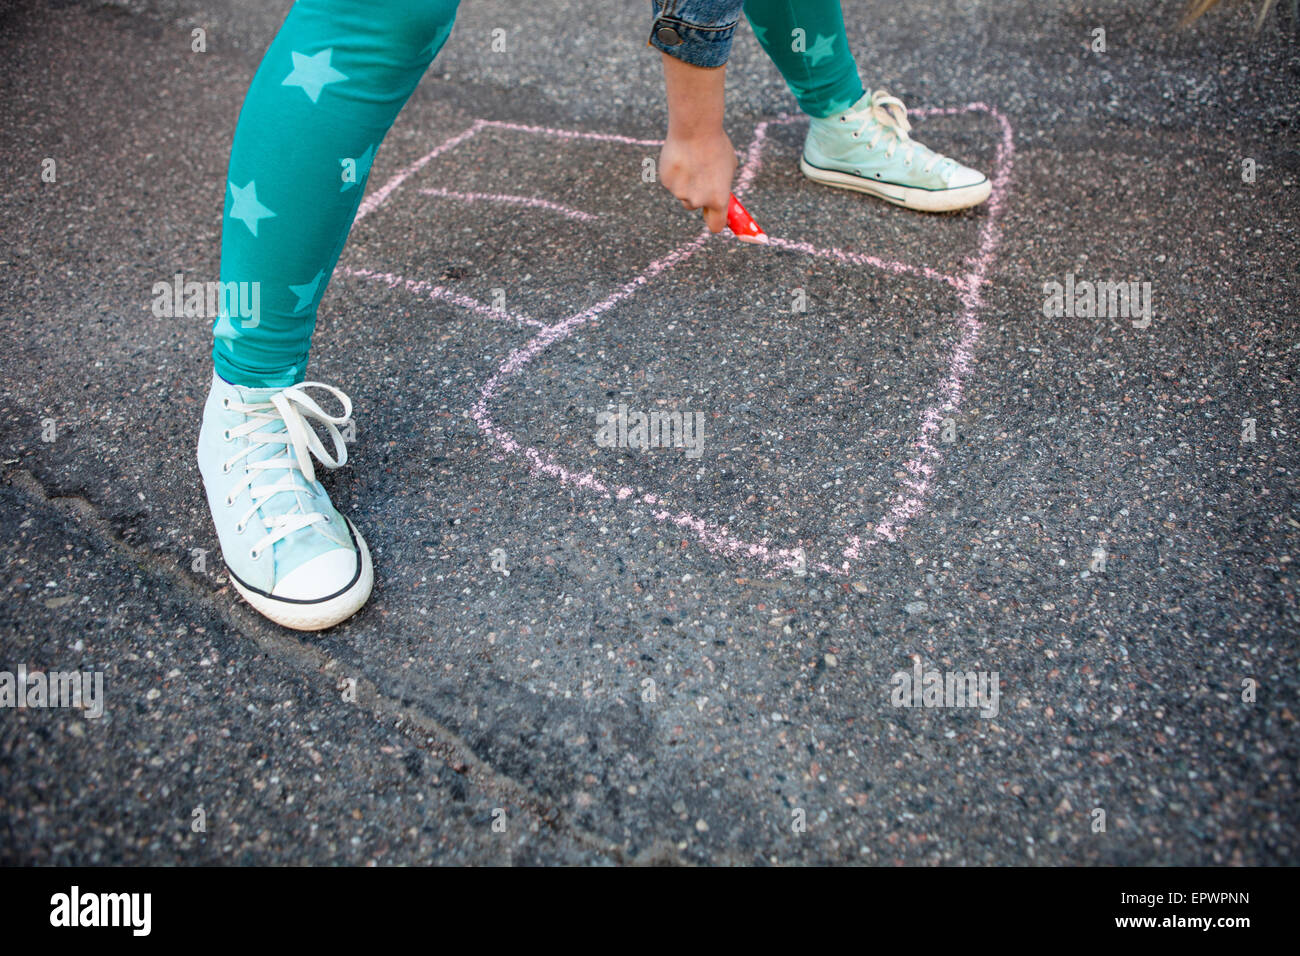 Girl drawing a hopscotch on asphalt with street chalk outdoors Stock Photo